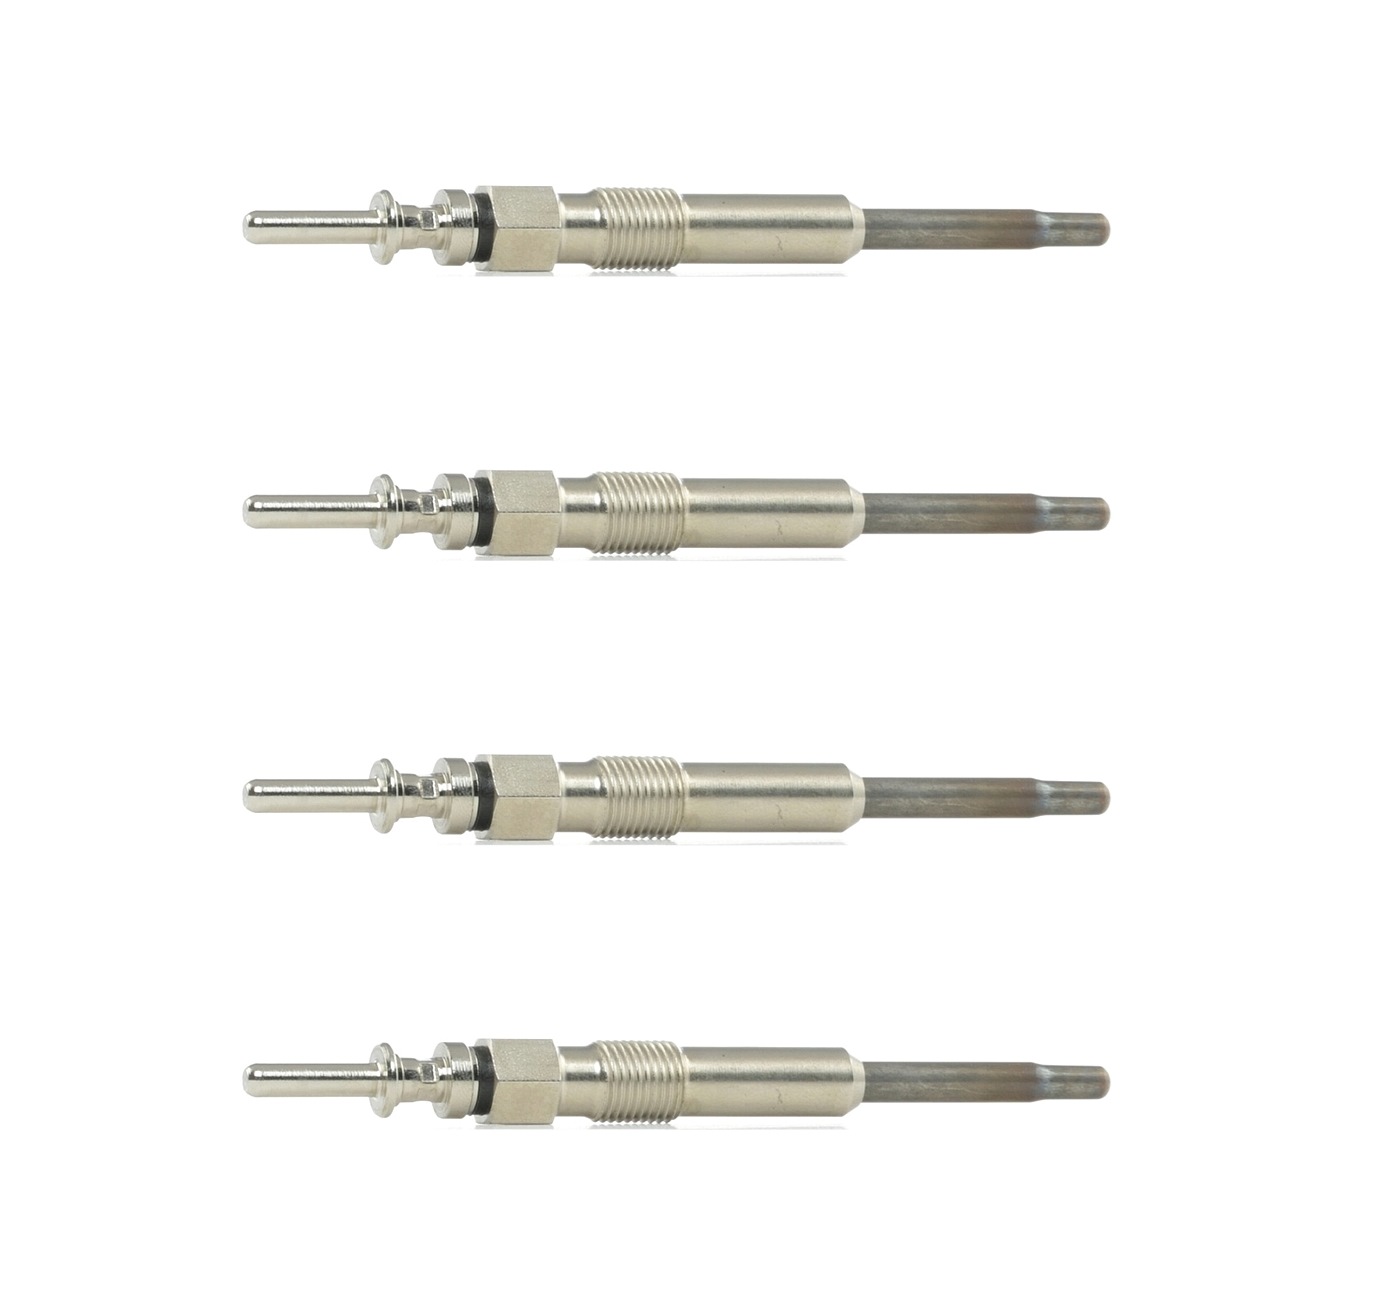 STARK 11V M10 x 1, after-glow capable, Pencil-type Glow Plug, 107 mm Total Length: 107mm, Thread Size: M10 x 1 Glow plugs SKGP-1890207 buy